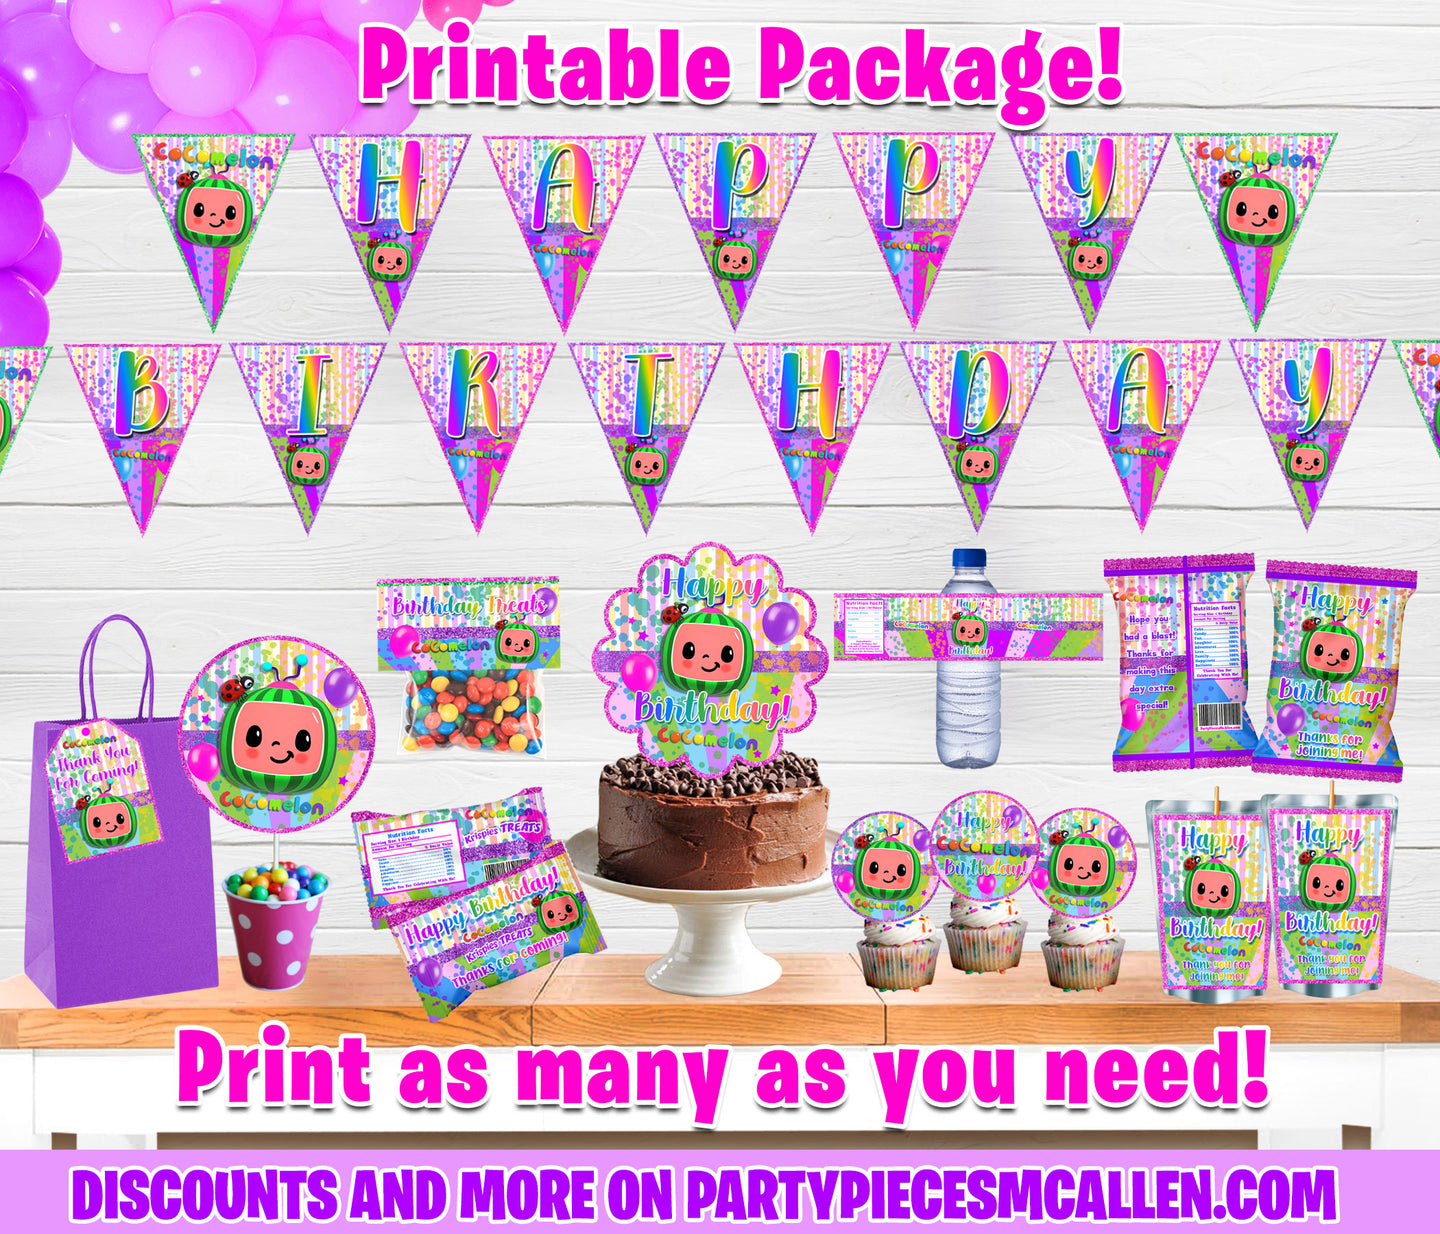 COCOMELON Printable Package